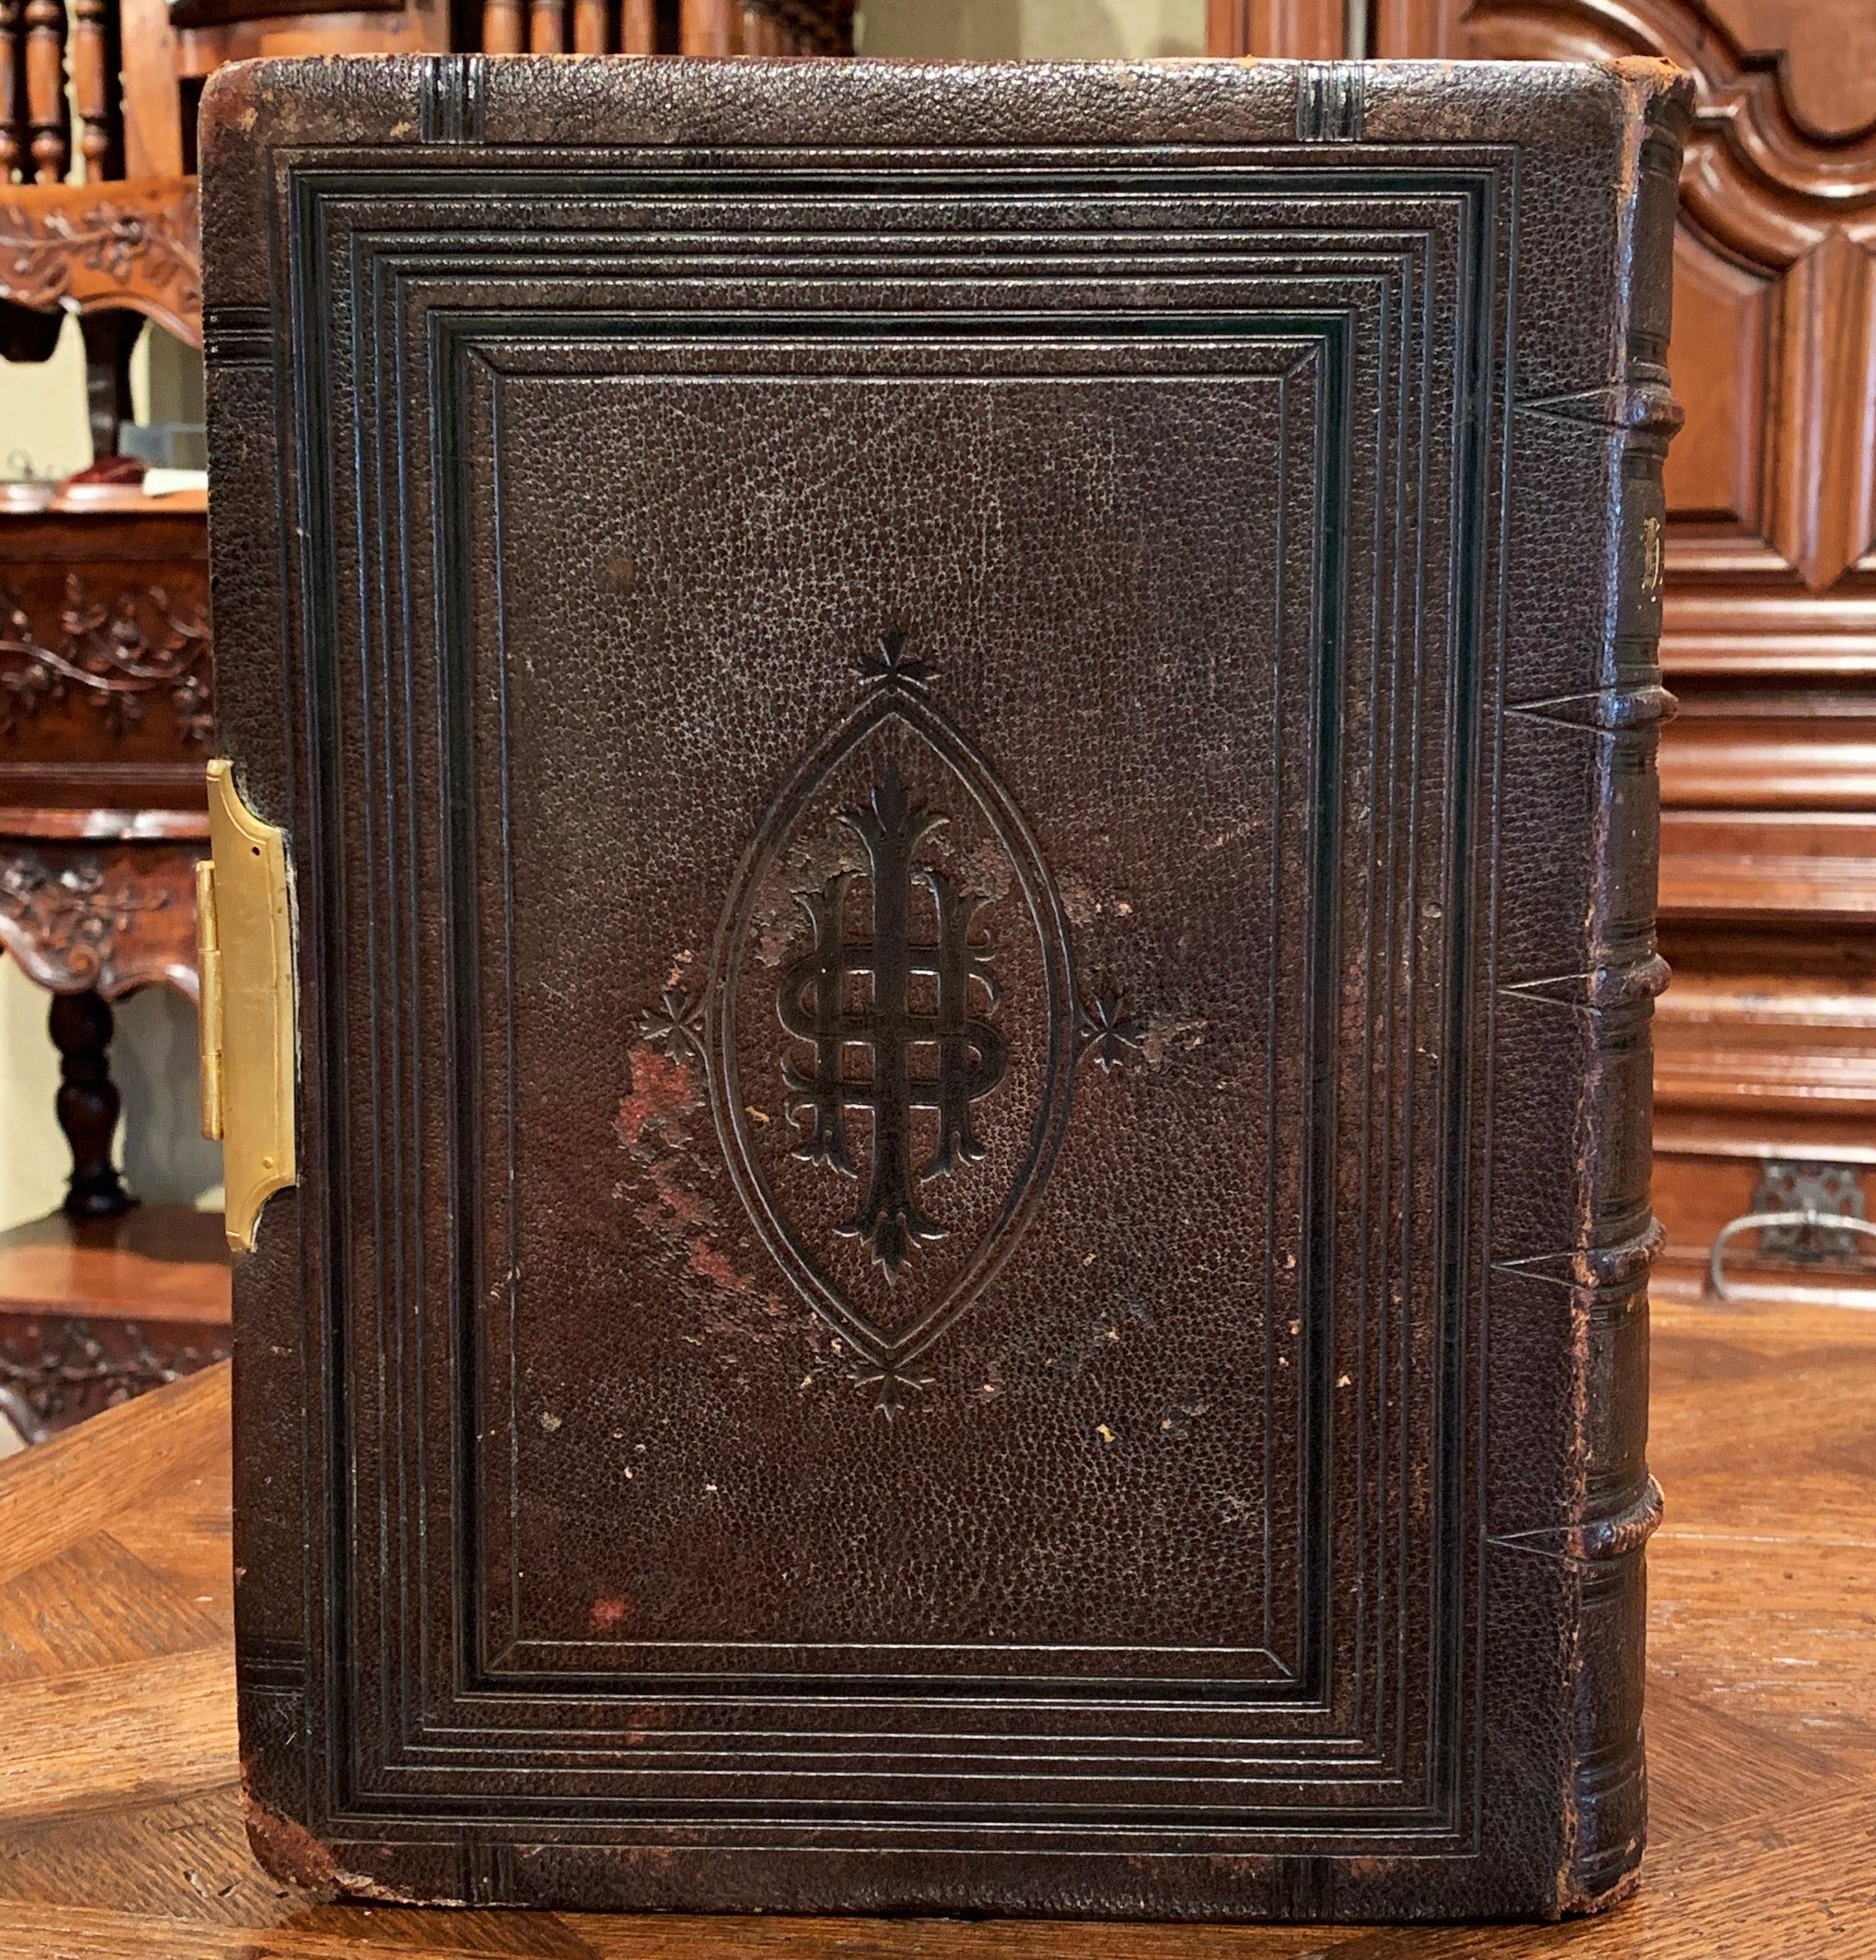 This beautiful antique Bible appointed to be read in churches, was printed at the University Press, Oxford, London. The inside front cover reads: William Harding Prize awarded to George William West on June 20th 1878. The book flaunts an engraved